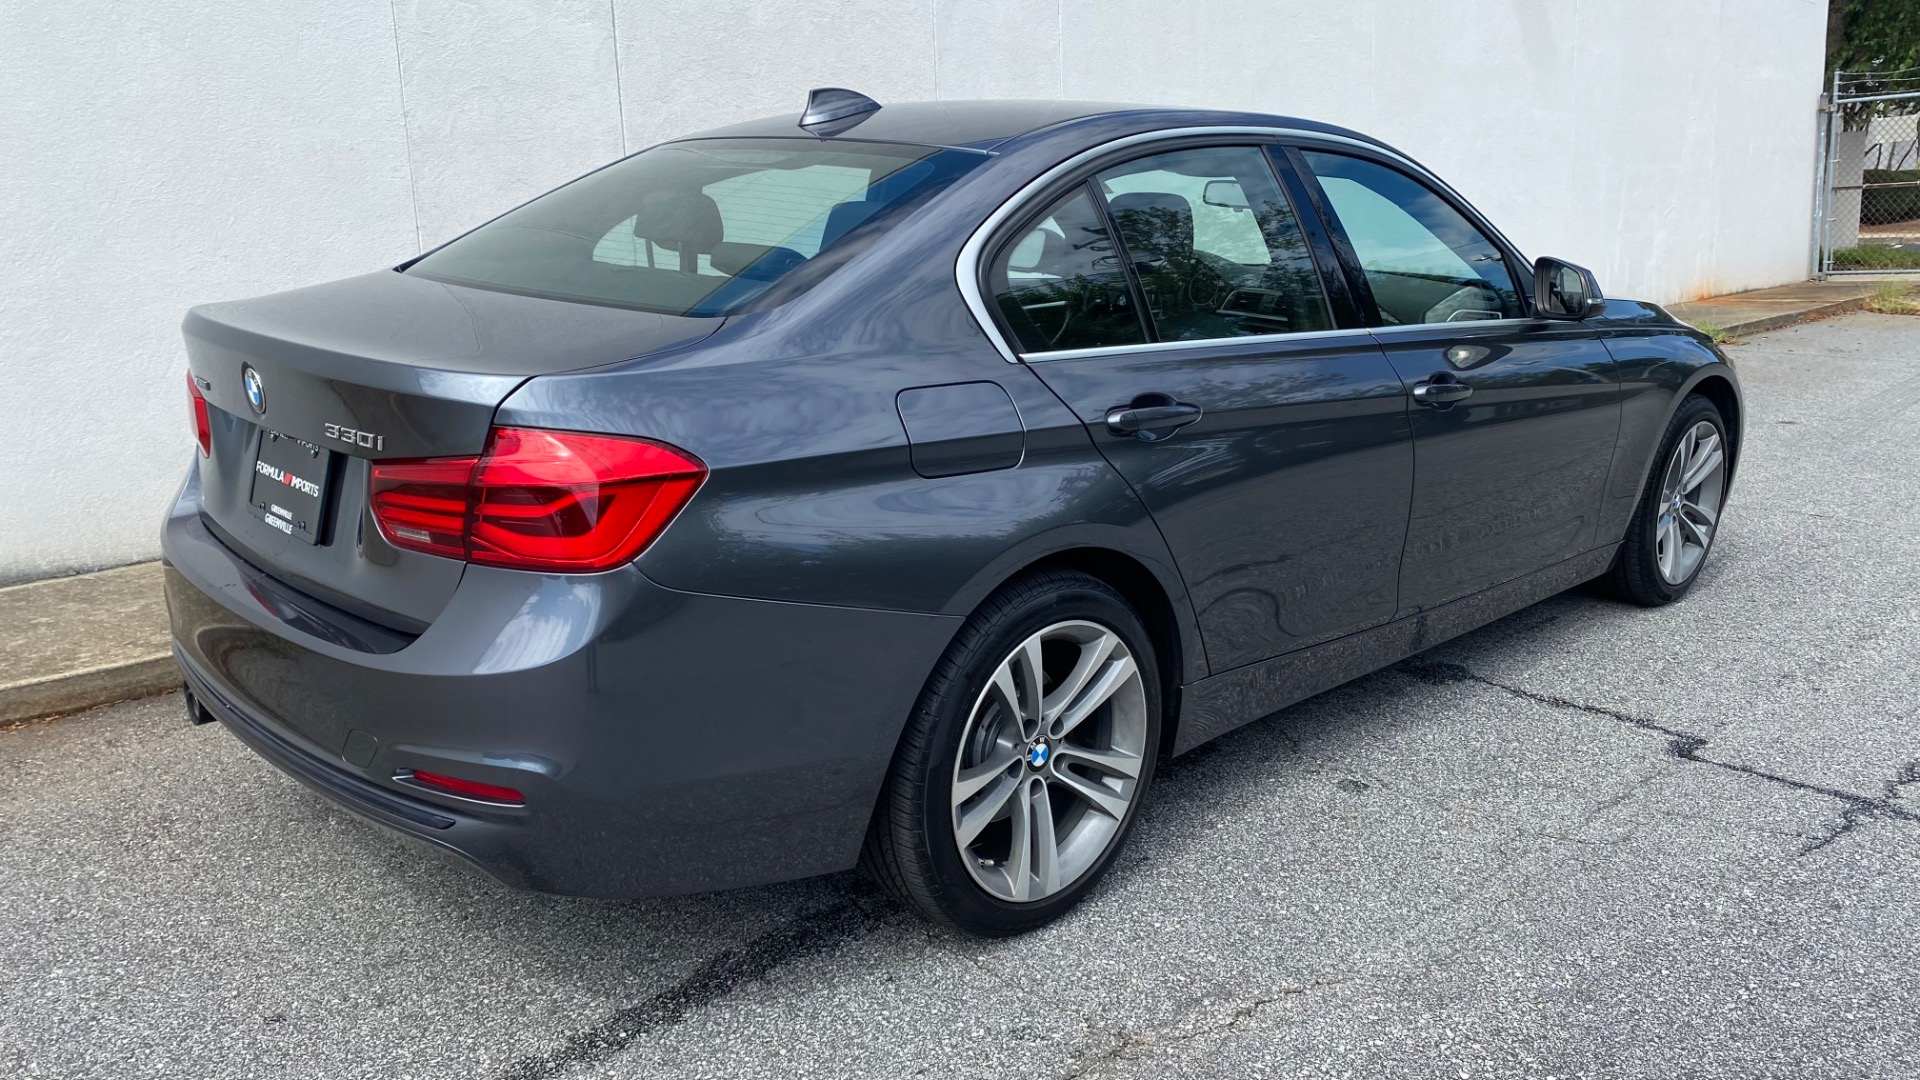 Used 2018 BMW 3 SERIES 330I XDRIVE / CONV PKG / SUNROOF / SPORT STS / HTD STS / REARVIE for sale Sold at Formula Imports in Charlotte NC 28227 9